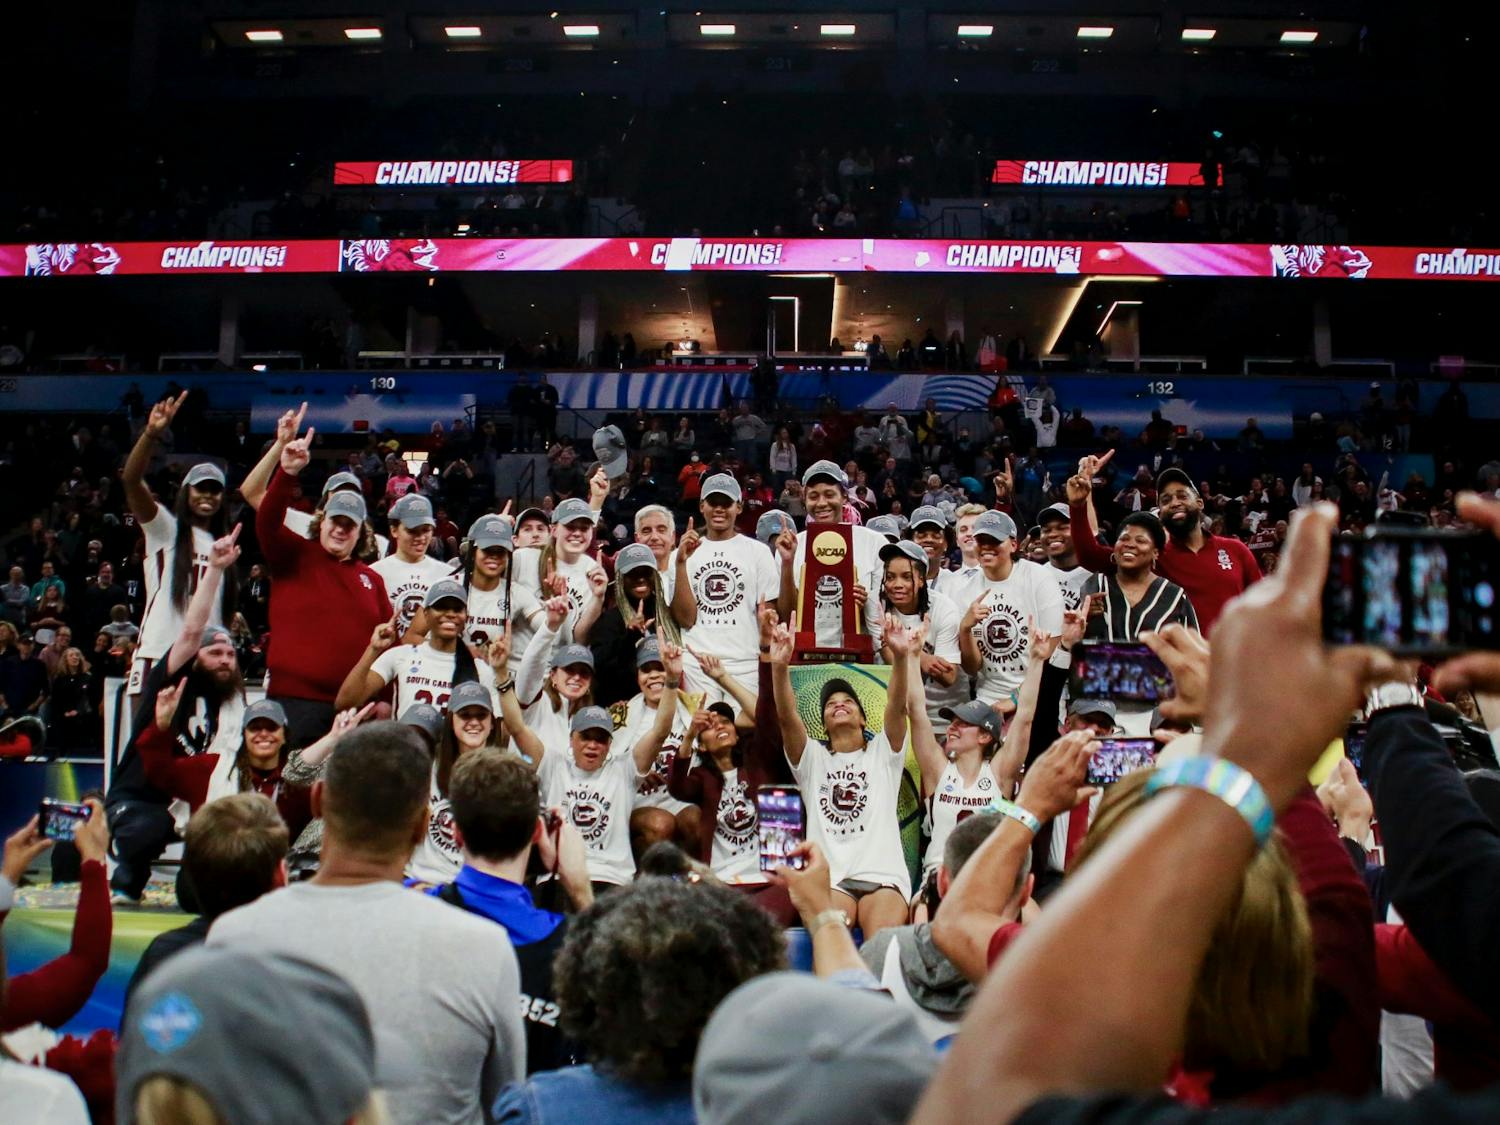 The South Carolina women's basketball team celebrates its national championship win against UConn on April 3, 2022. Since the win, two Gamecocks have announced plans to enter the transfer portal and one transfer guard committed to South Carolina.&nbsp;